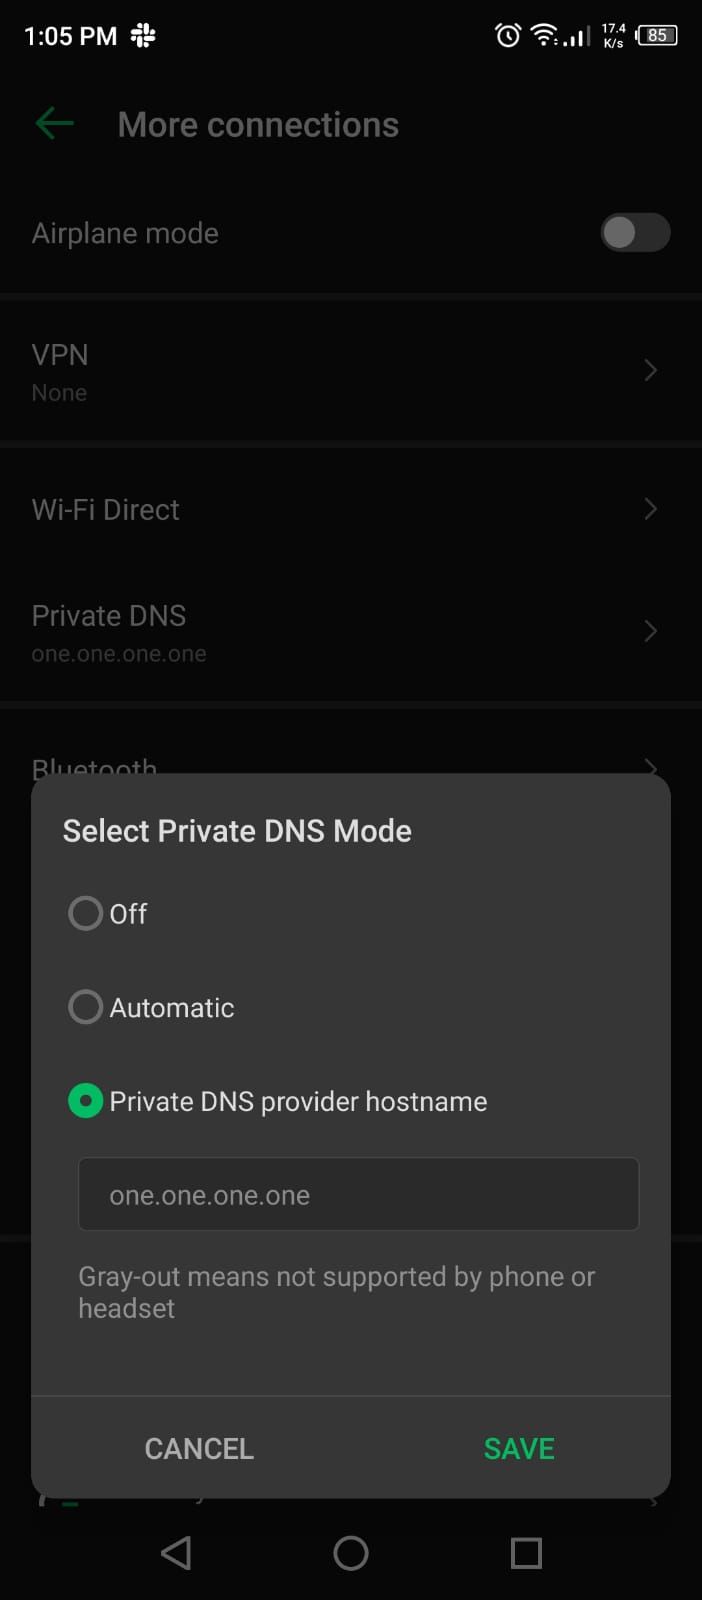 Private DNS provider hostname in Android Settings